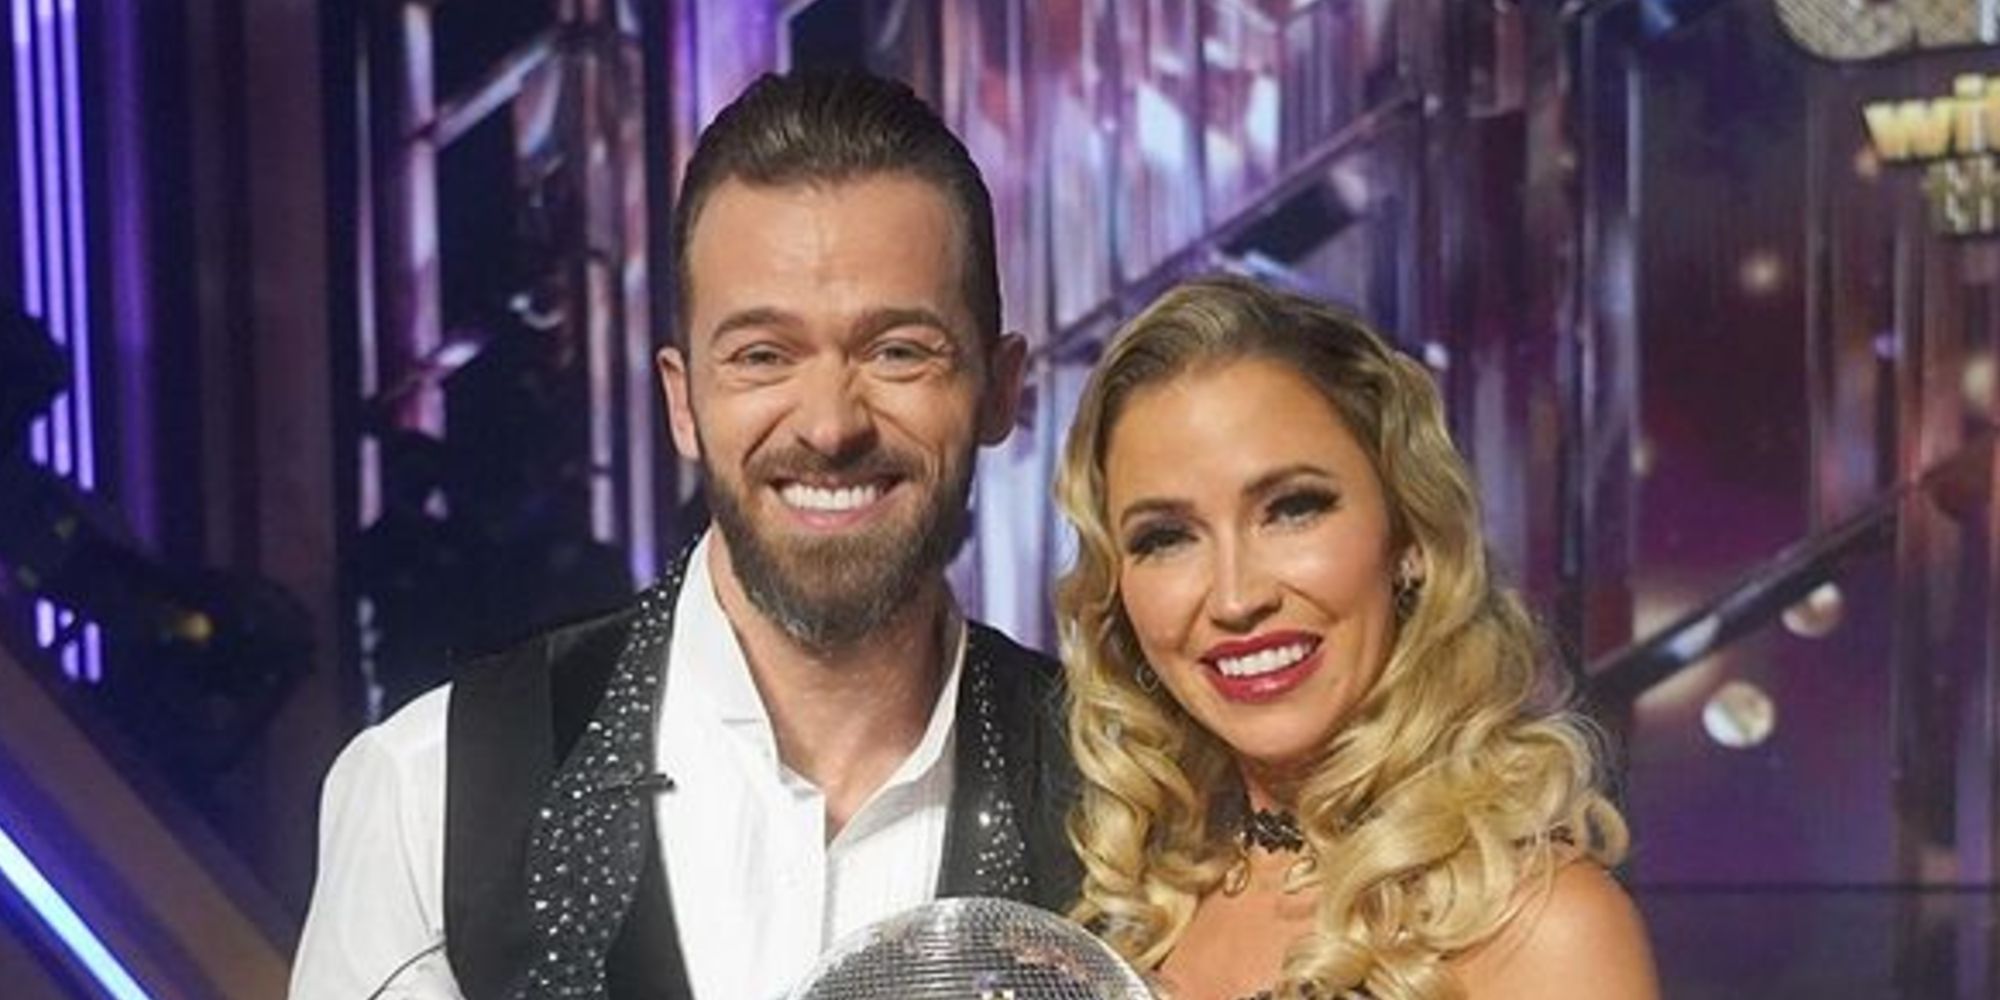 Kaitlyn Bristowe and Artem Chigvintsev on the Dancing With The Stars 2020 season 29 finale